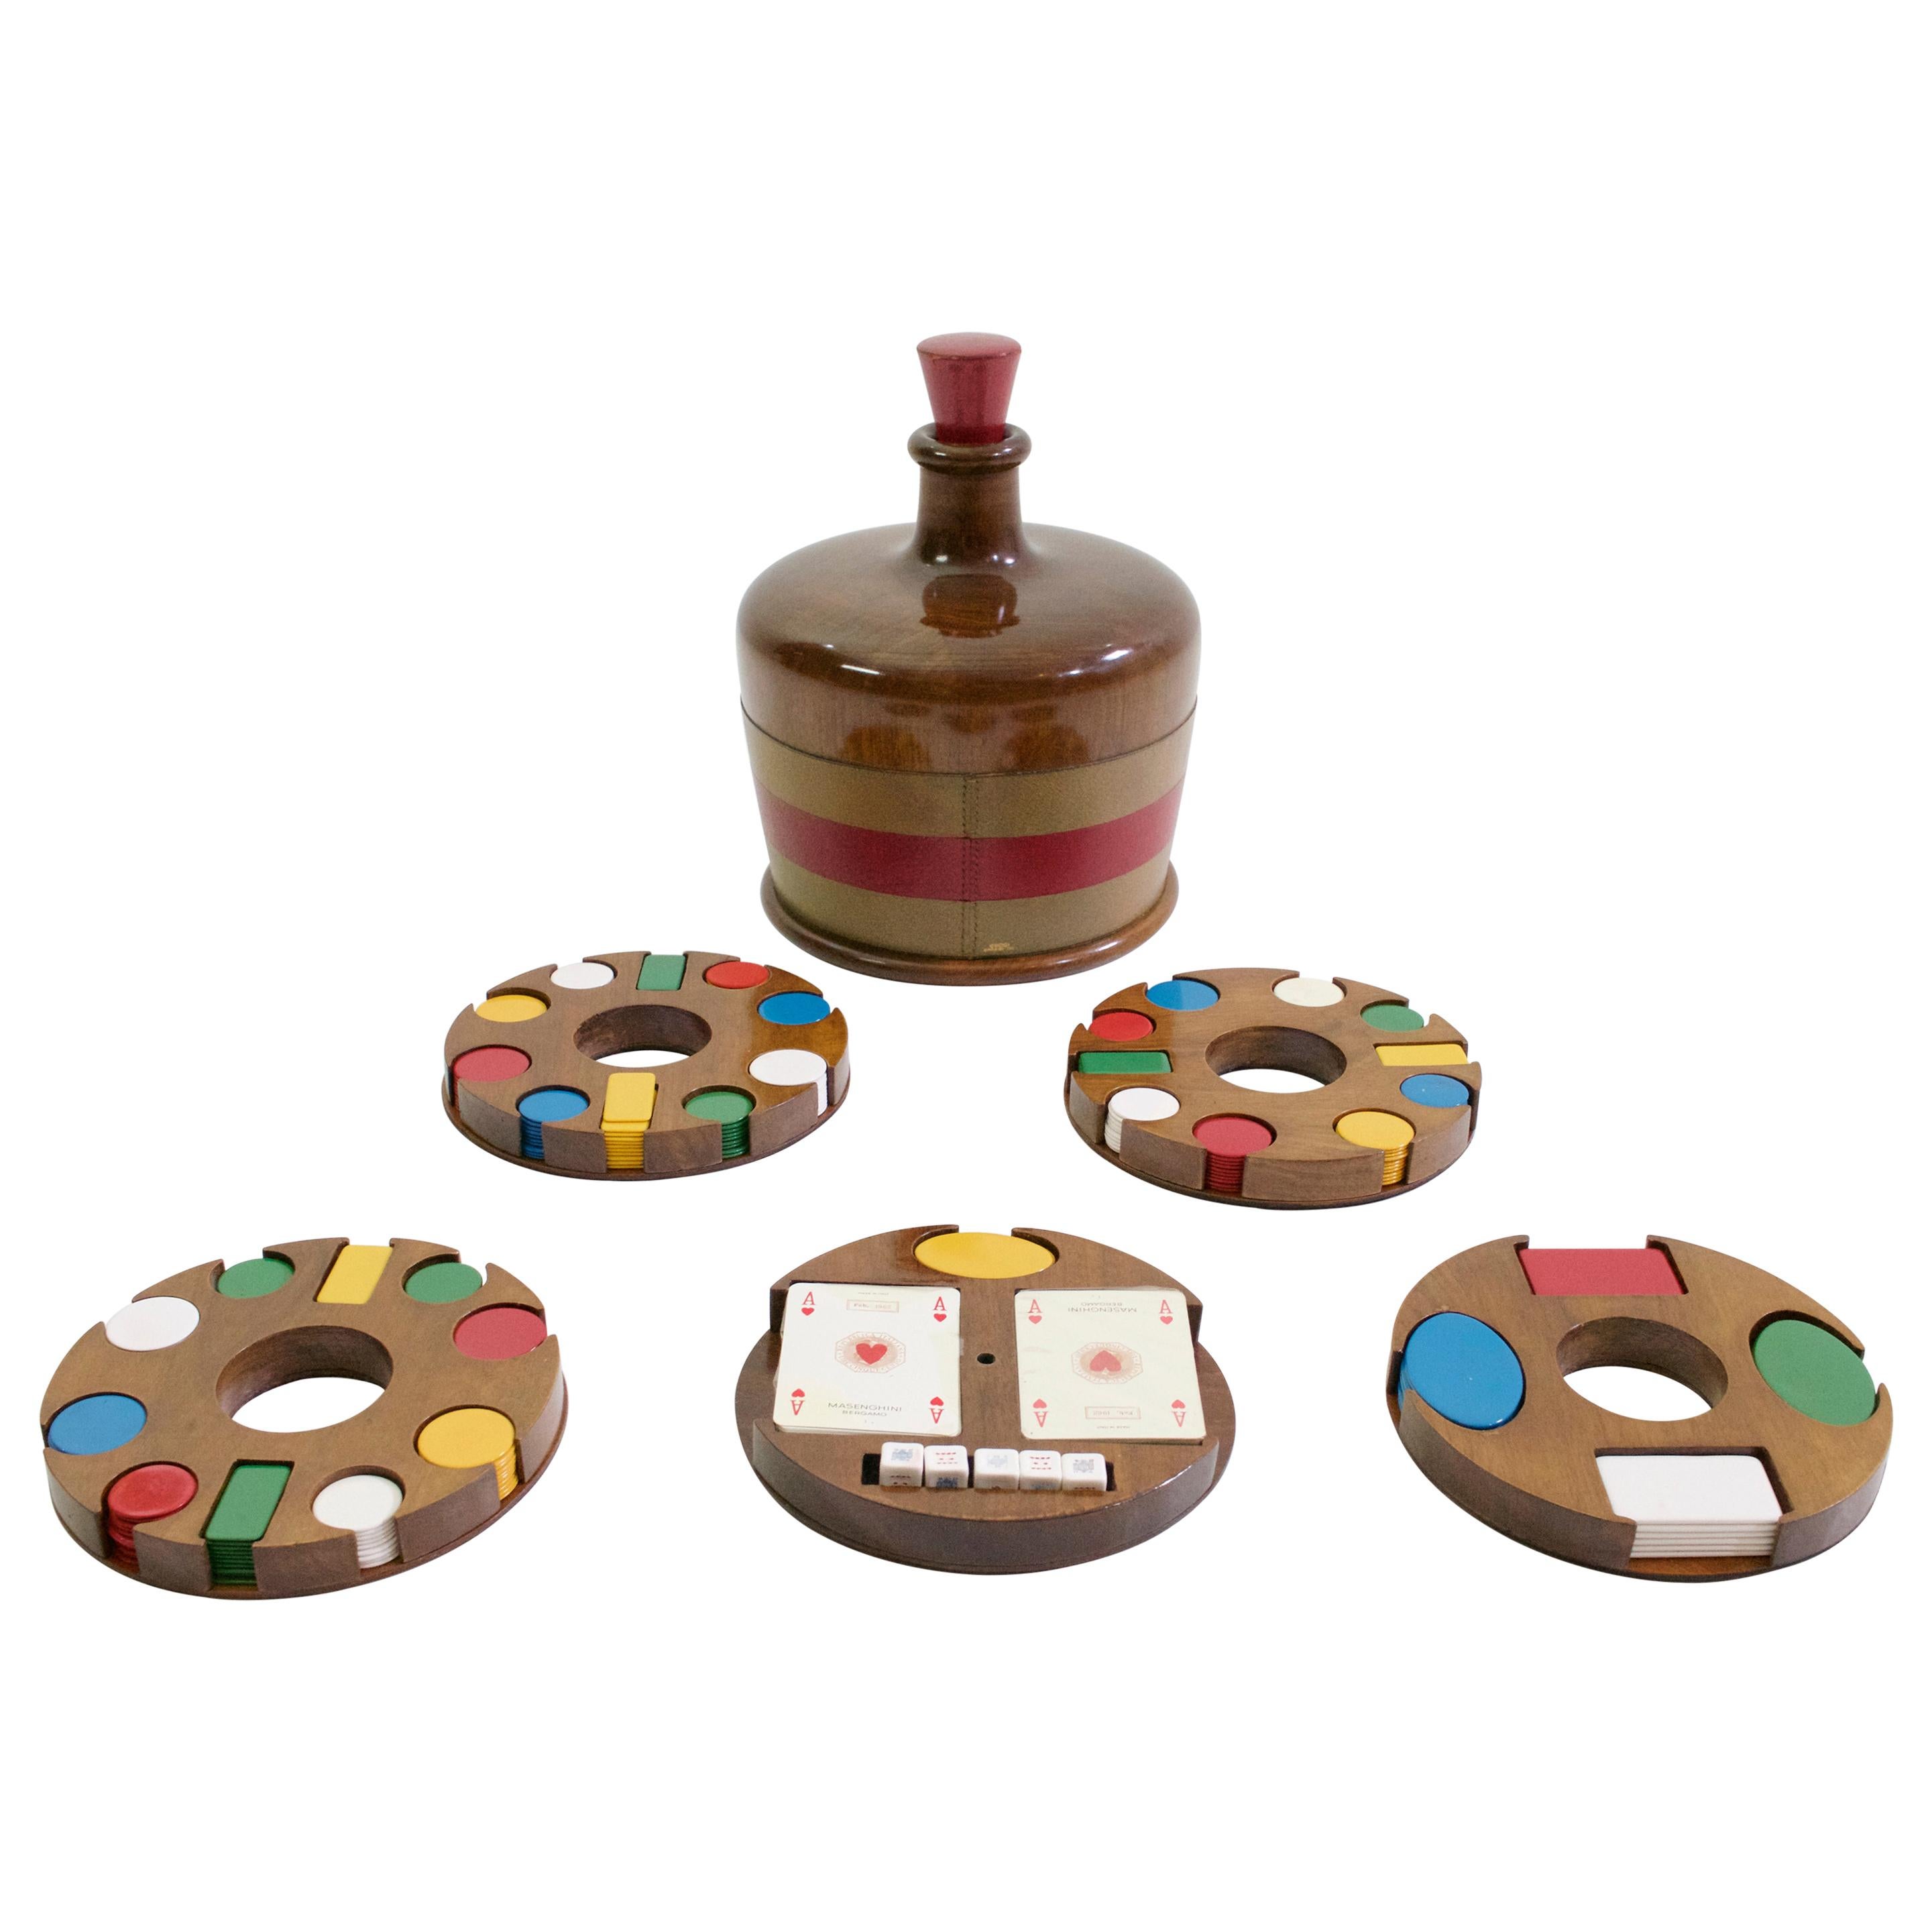 Gucci Poker Set Bottle in Mint Condition, 1962